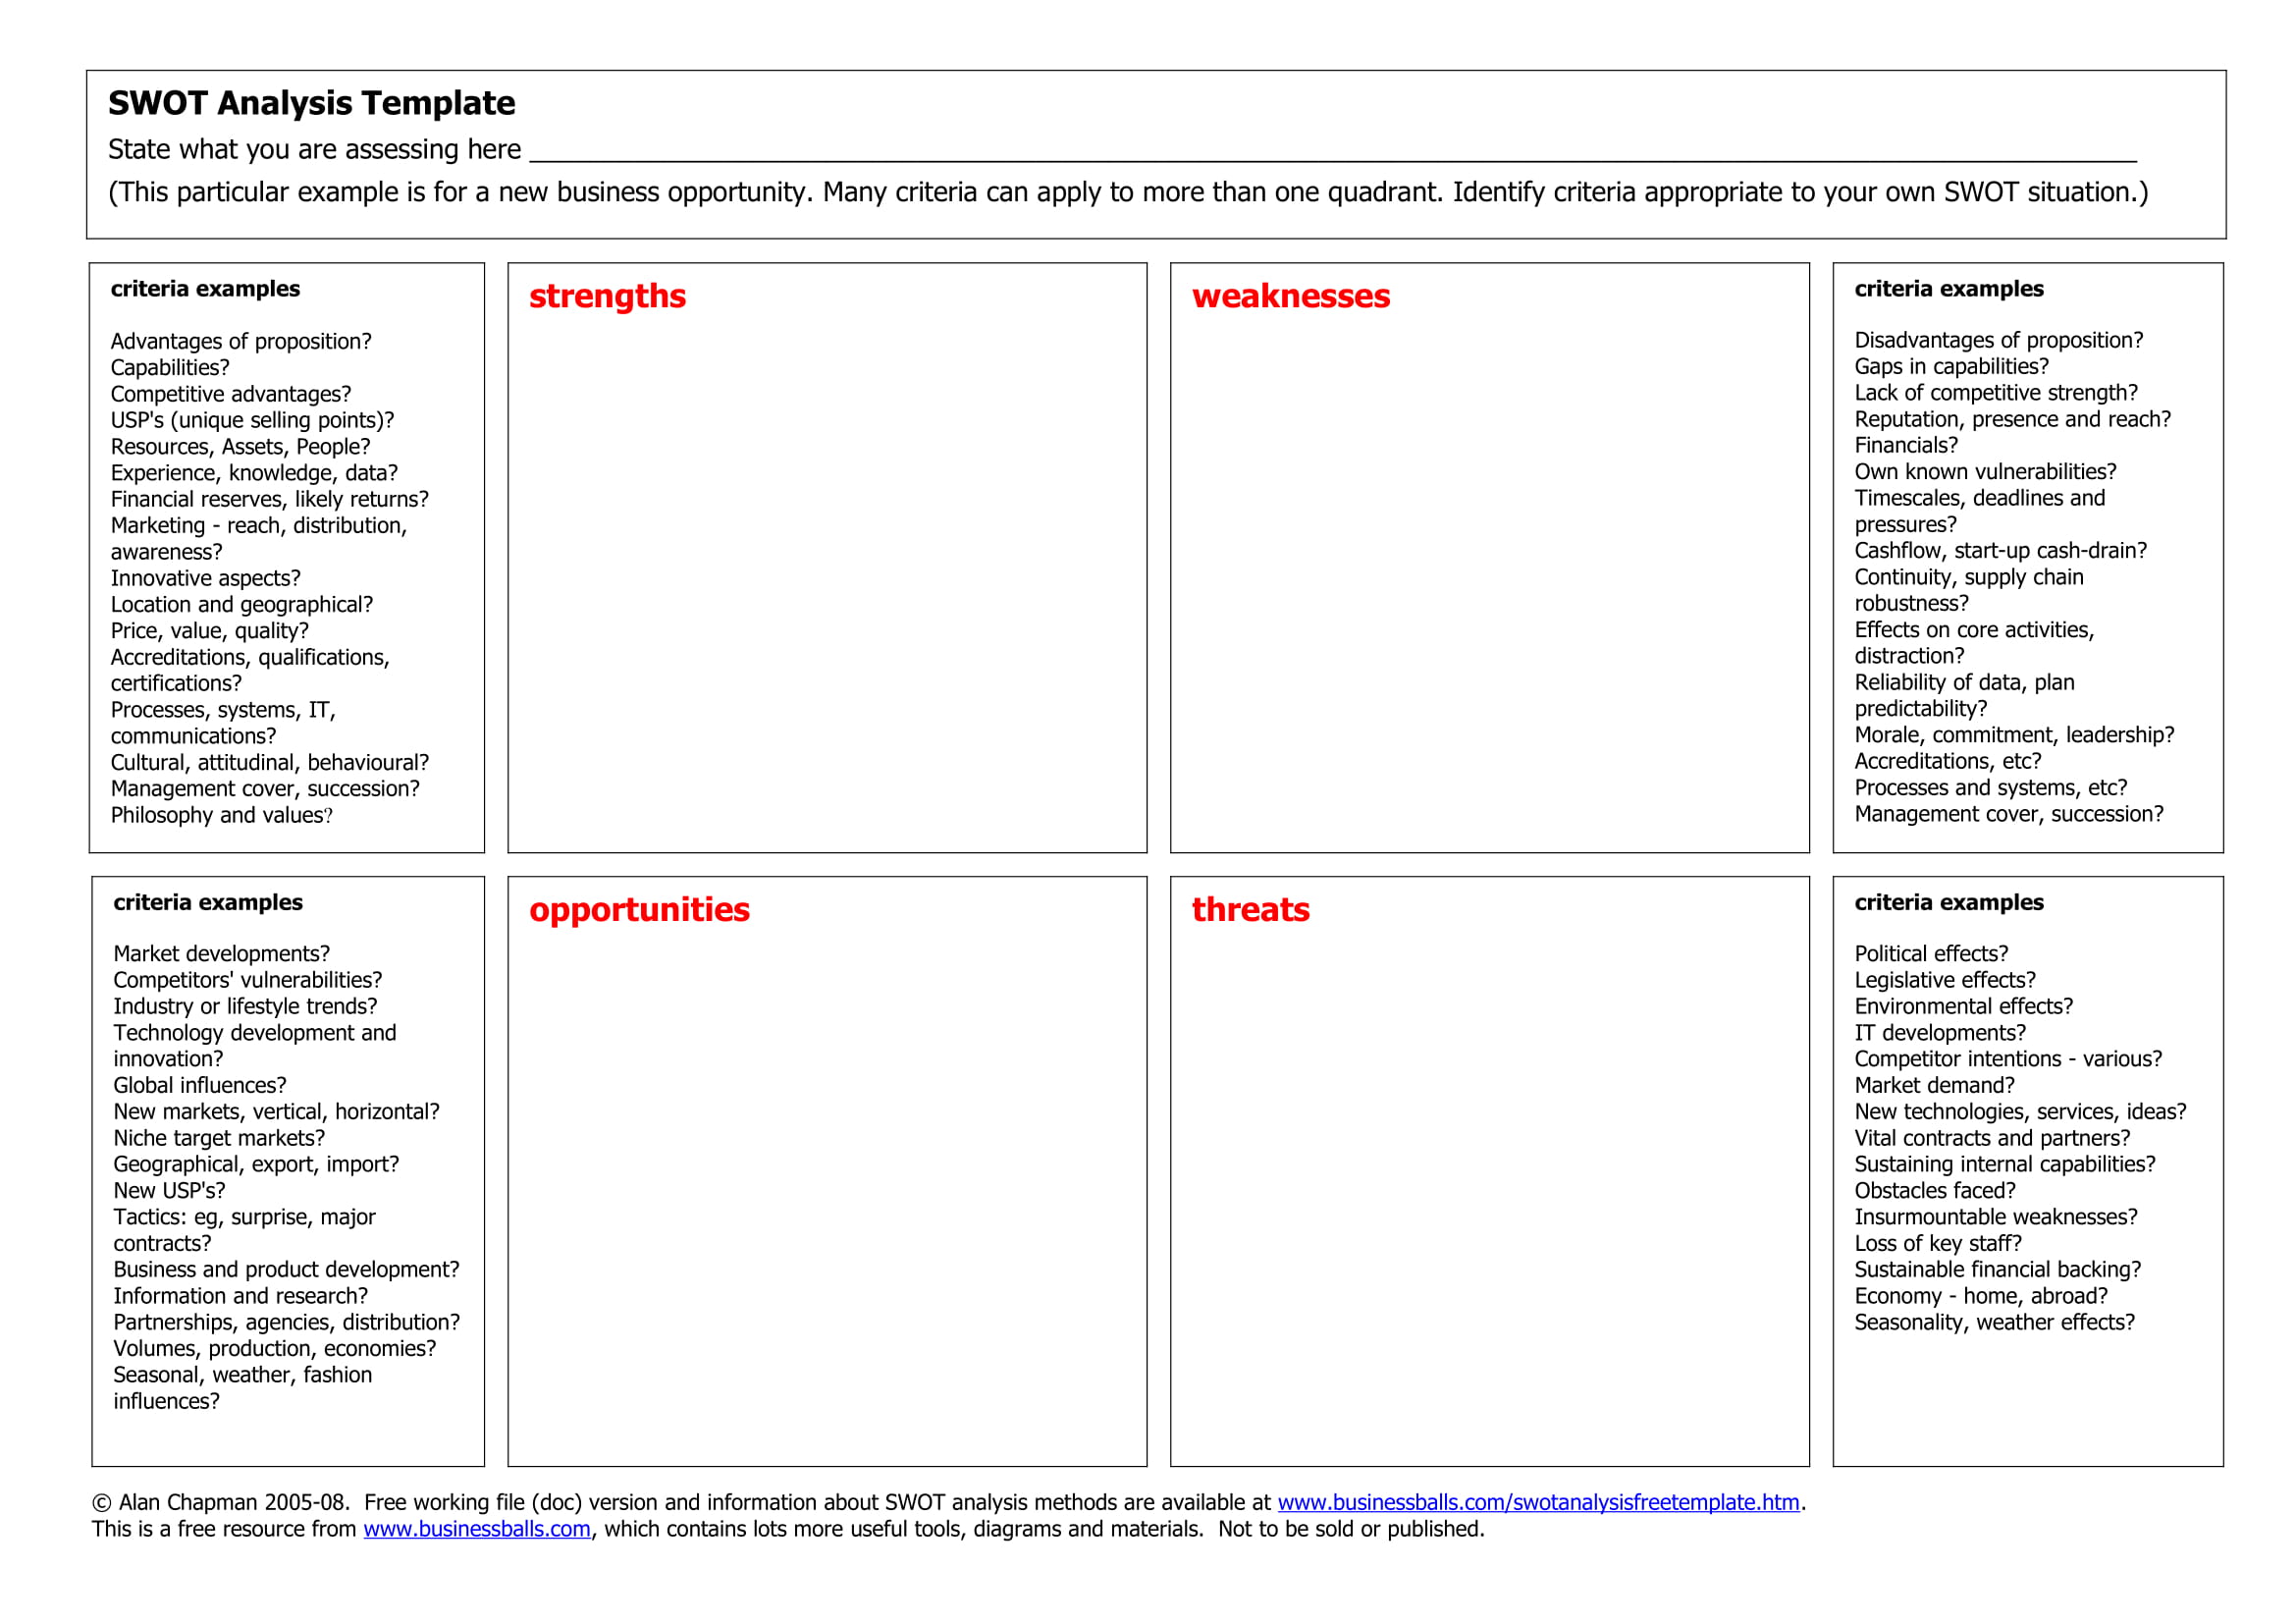 SWOT Analysis Chart Template Example 1